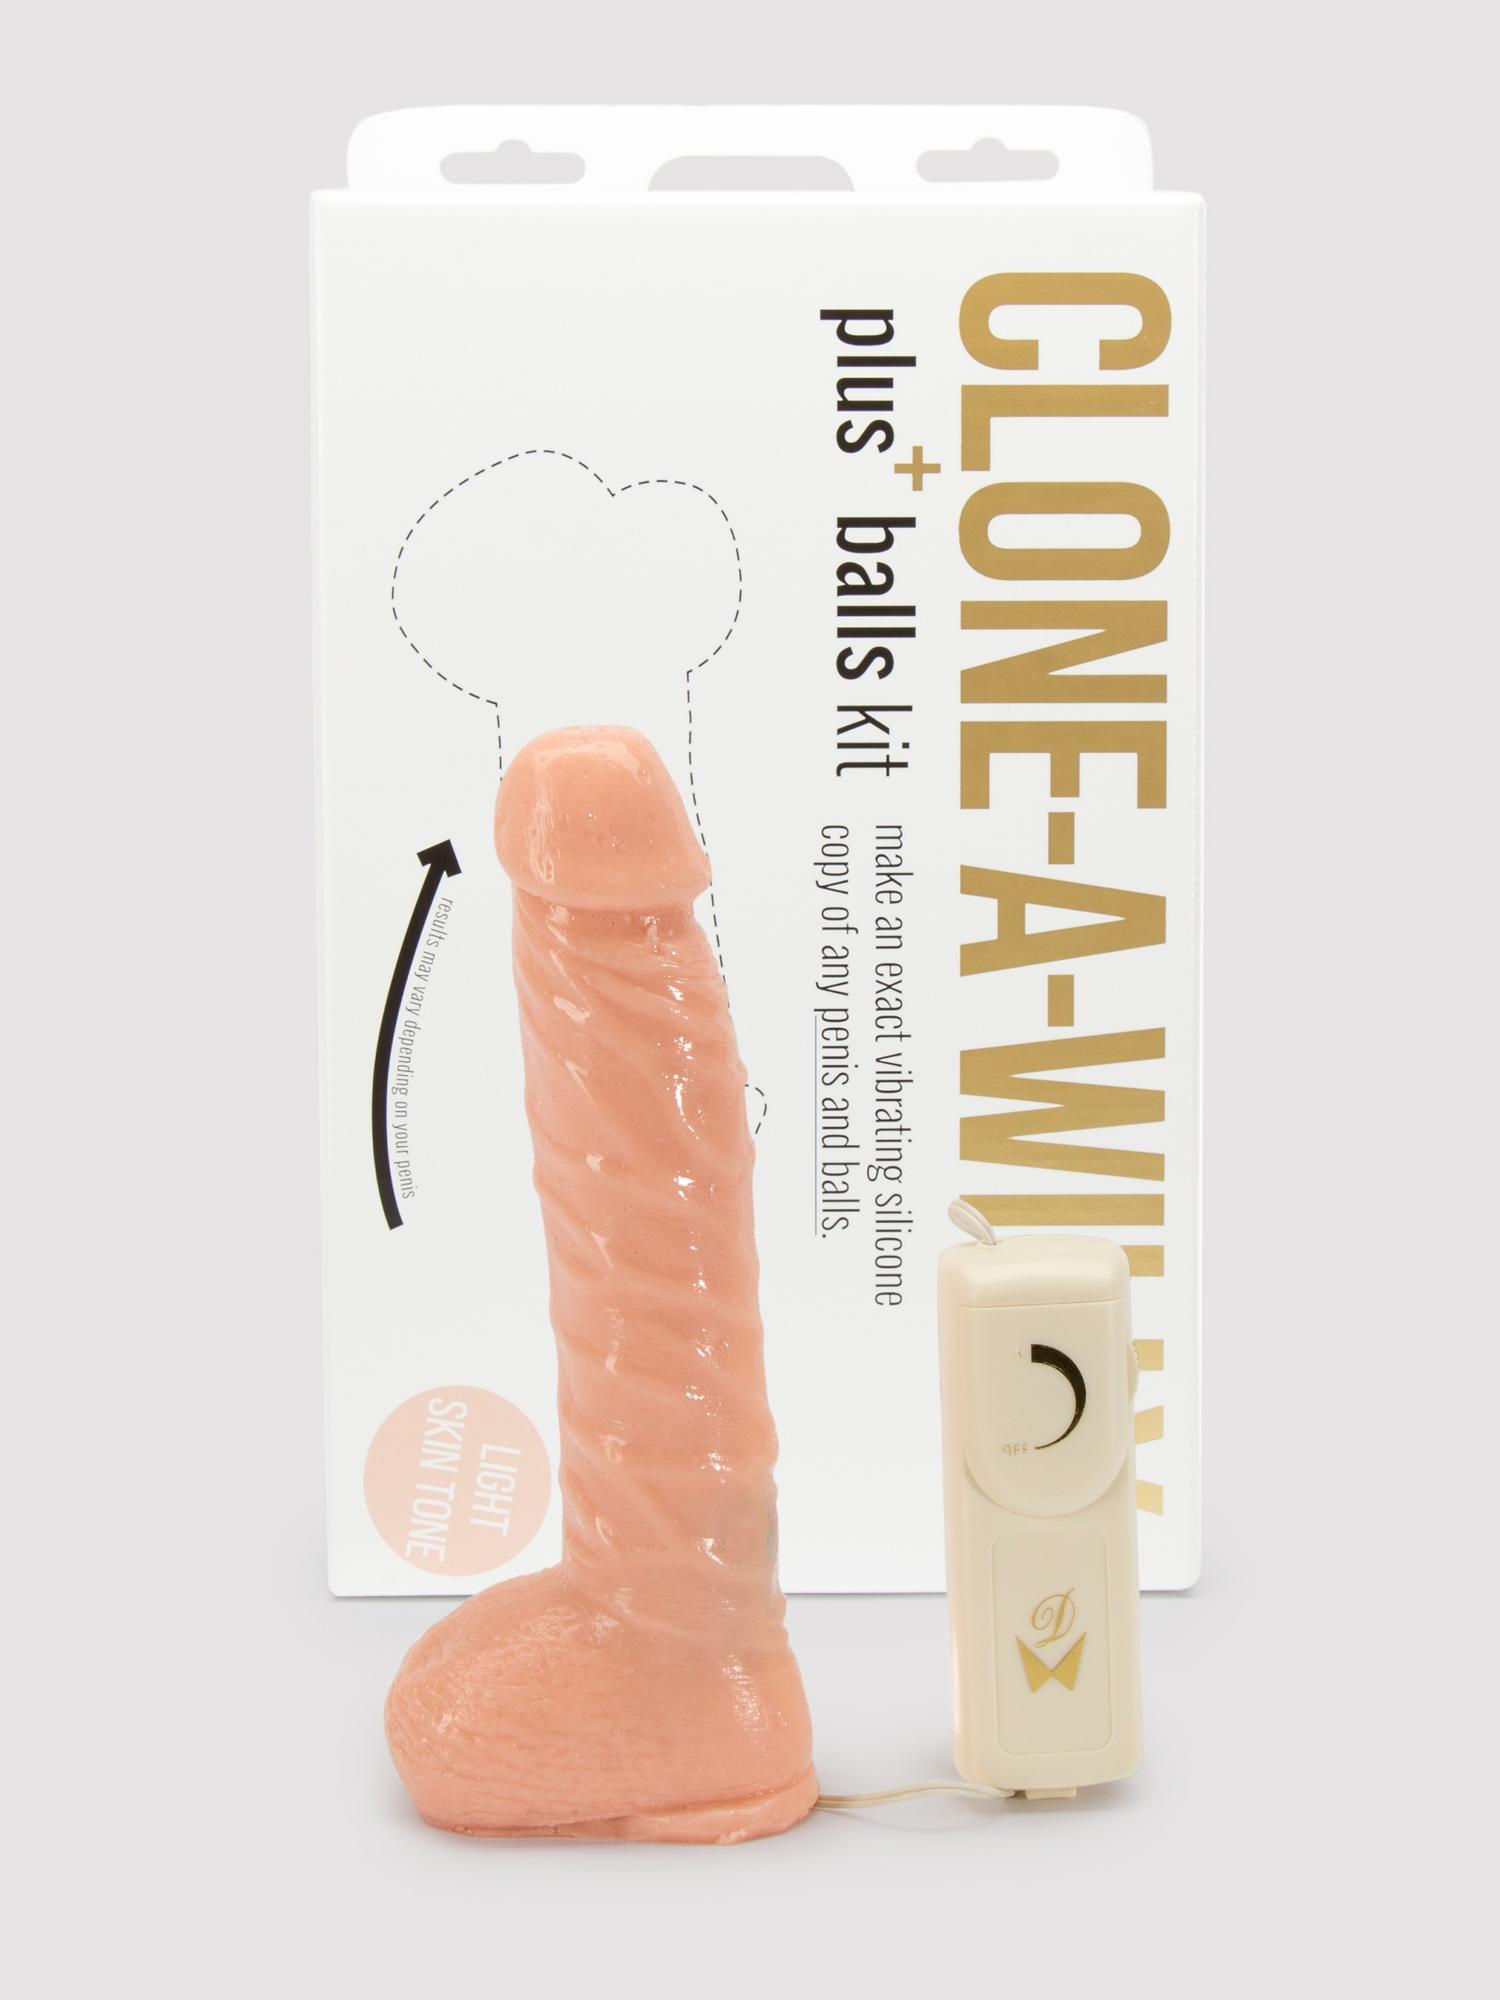 Clone-A-Willy and Balls Vibrator Molding Kit. Slide 1